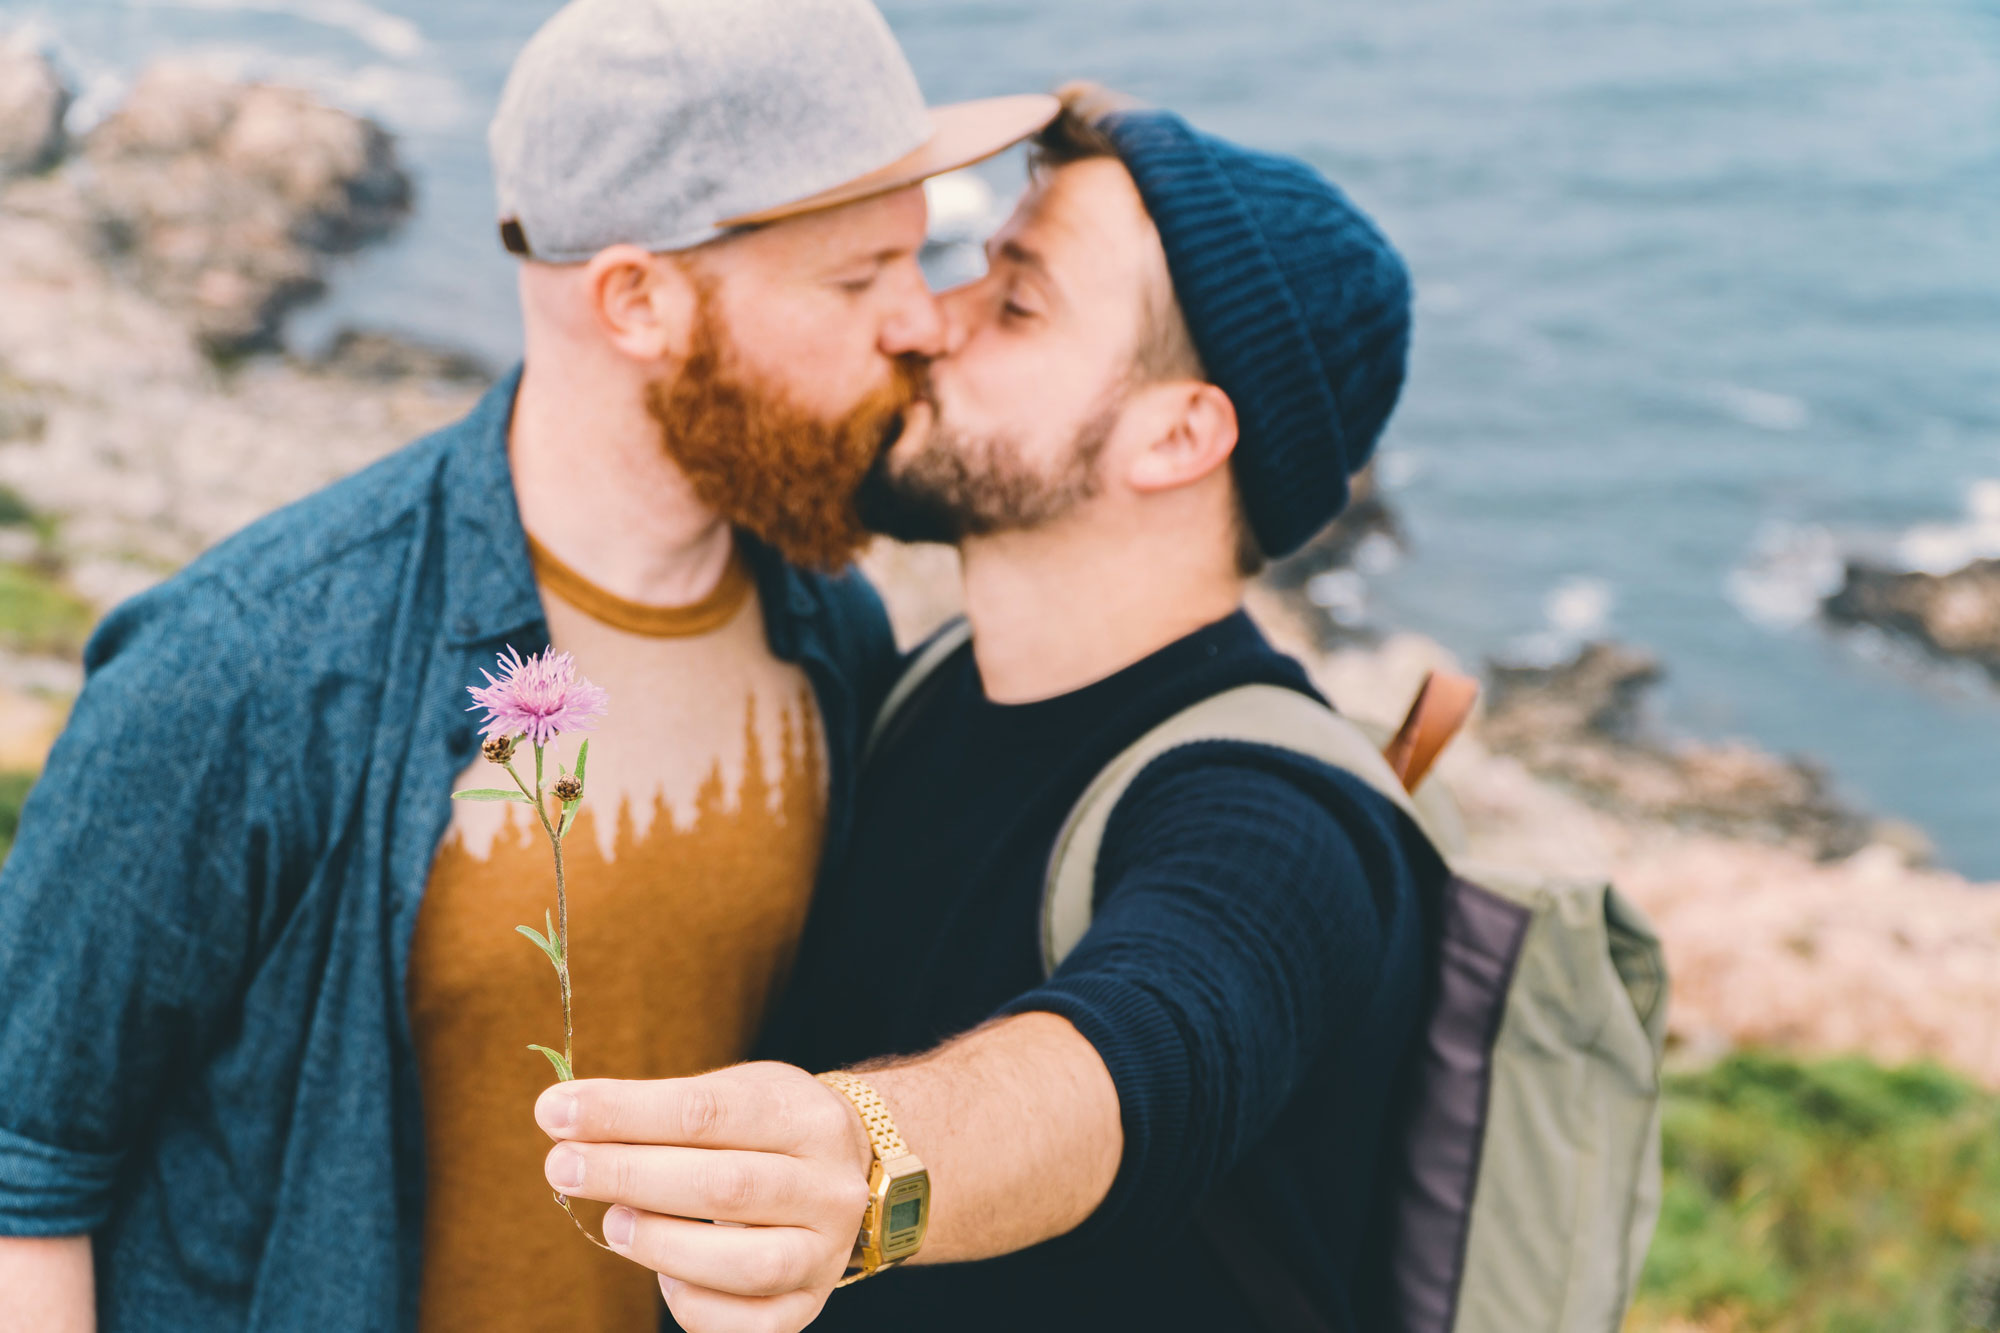 We love Southern Sweden's nature - A Gay Kiss on that © Coupleofmen.com